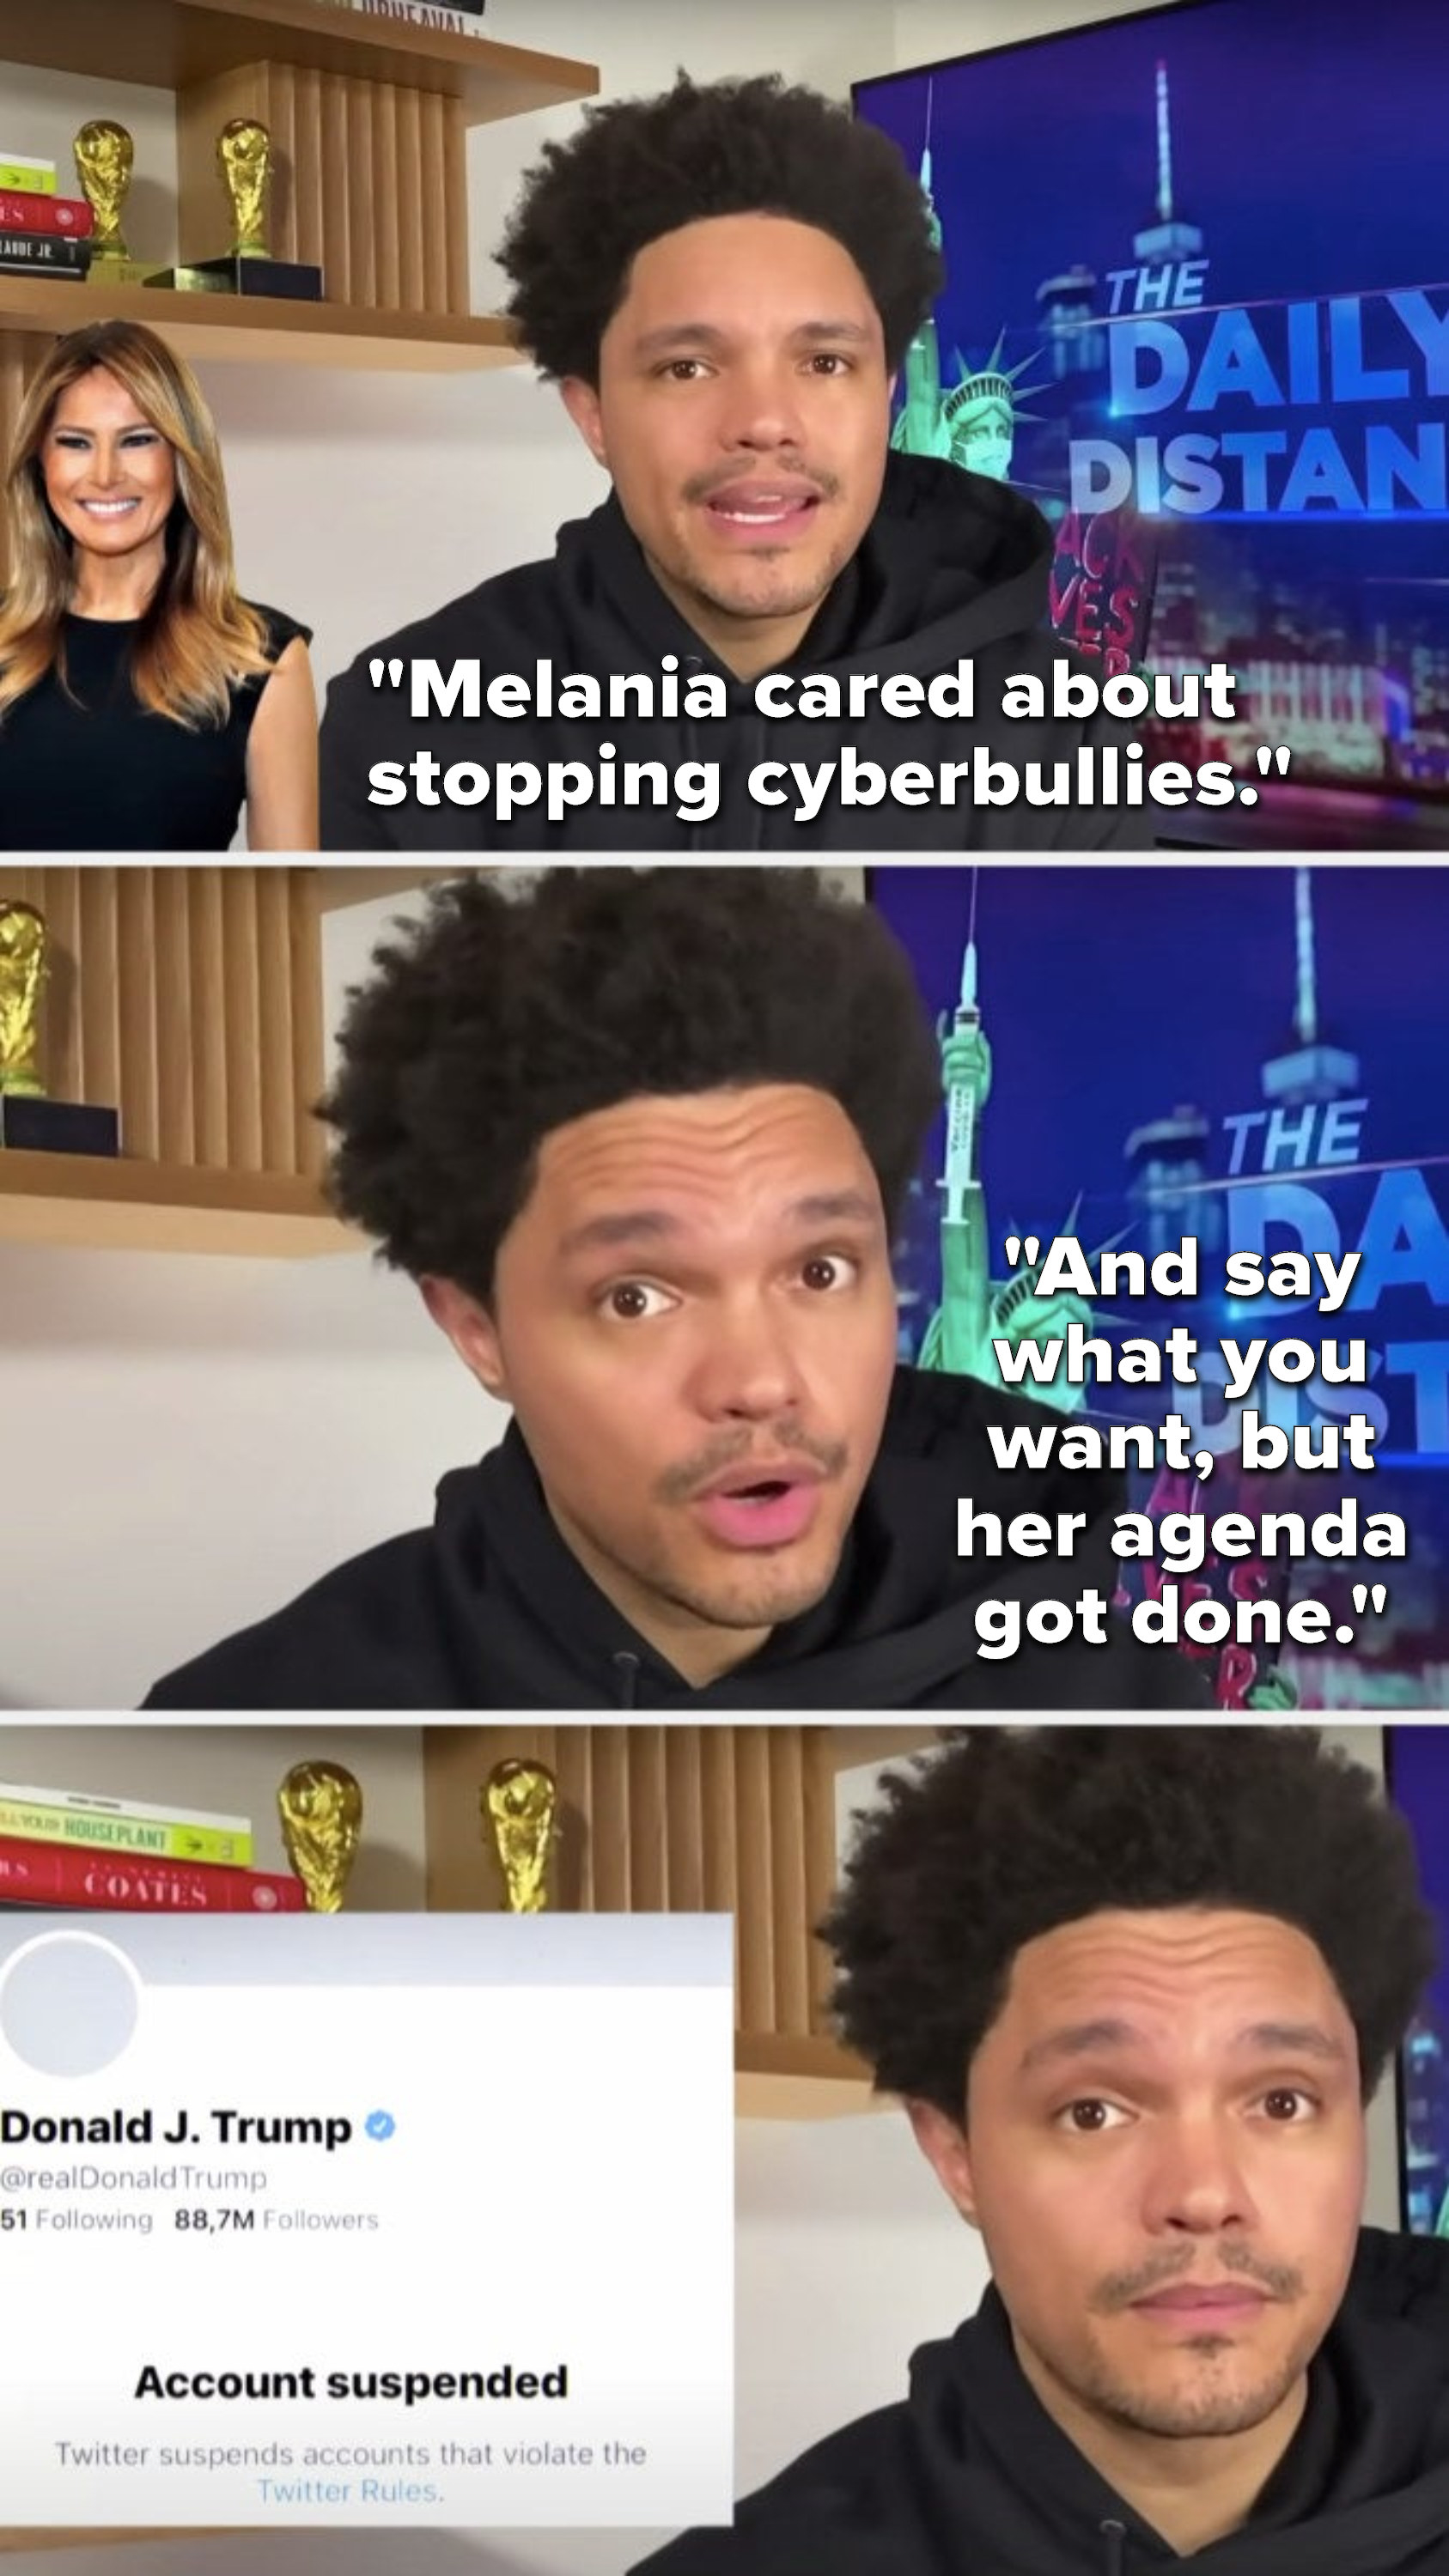 Noah says, &quot;Melania cared about stopping cyberbullies, and say what you want, but her agenda got done,&quot; and then we see Donald Trump&#x27;s suspended twitter account page